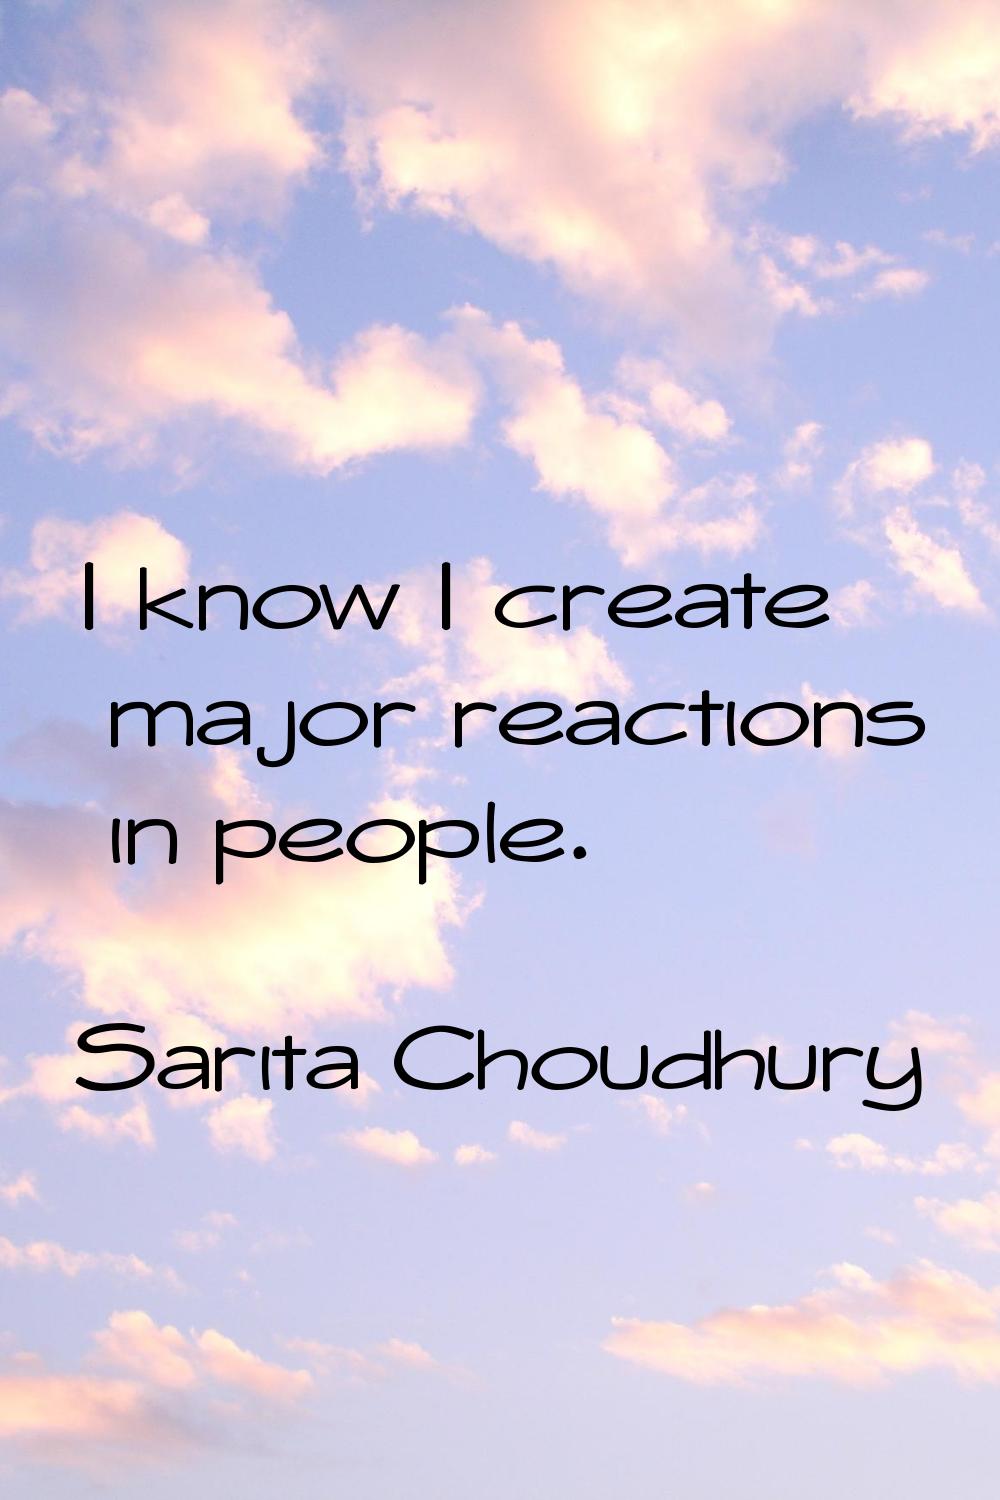 I know I create major reactions in people.